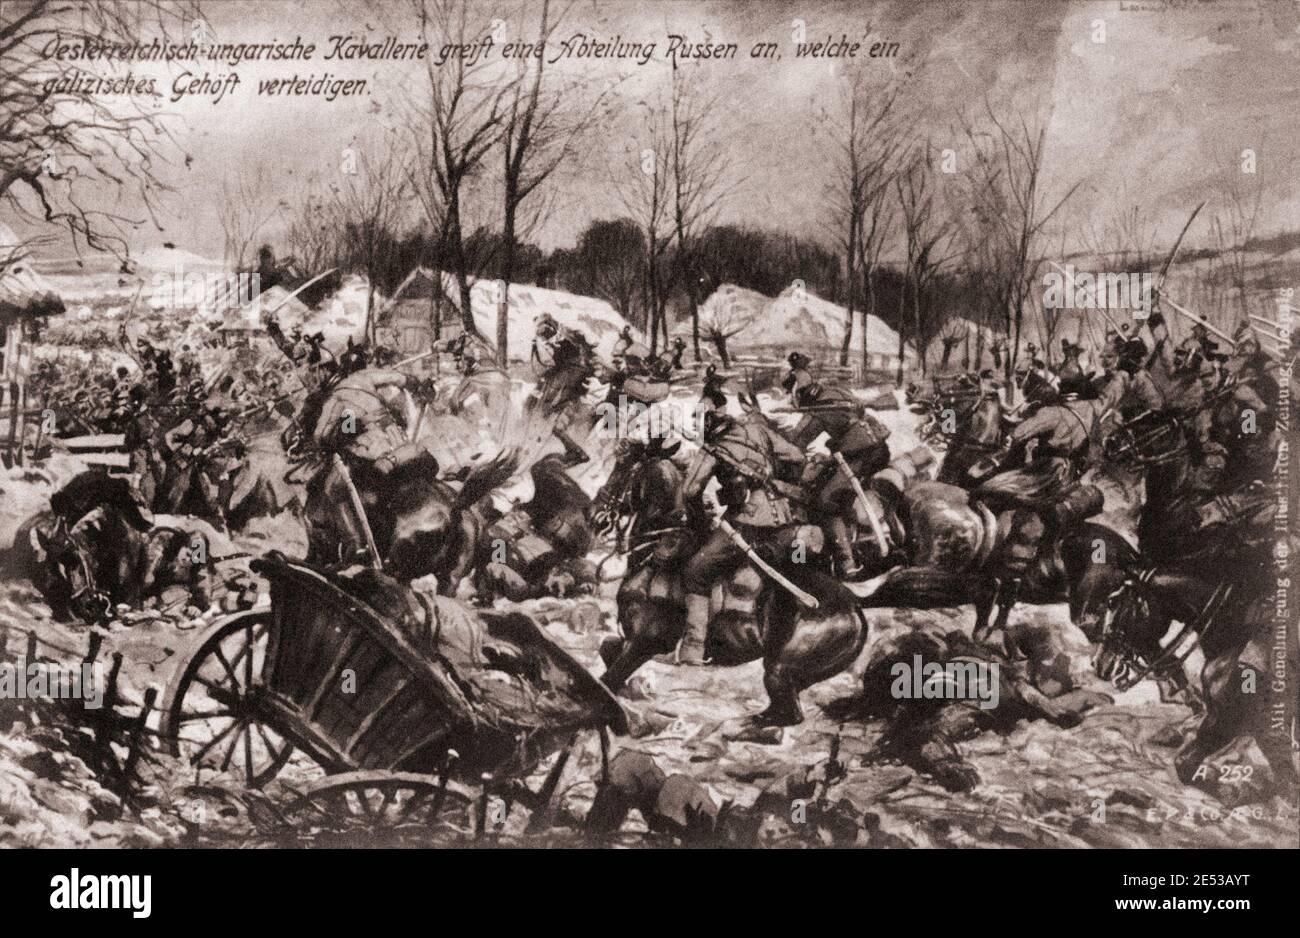 The First World War period. Austro-Hungarian cavalry attacks a Russian unit defending a Galician estate. Stock Photo